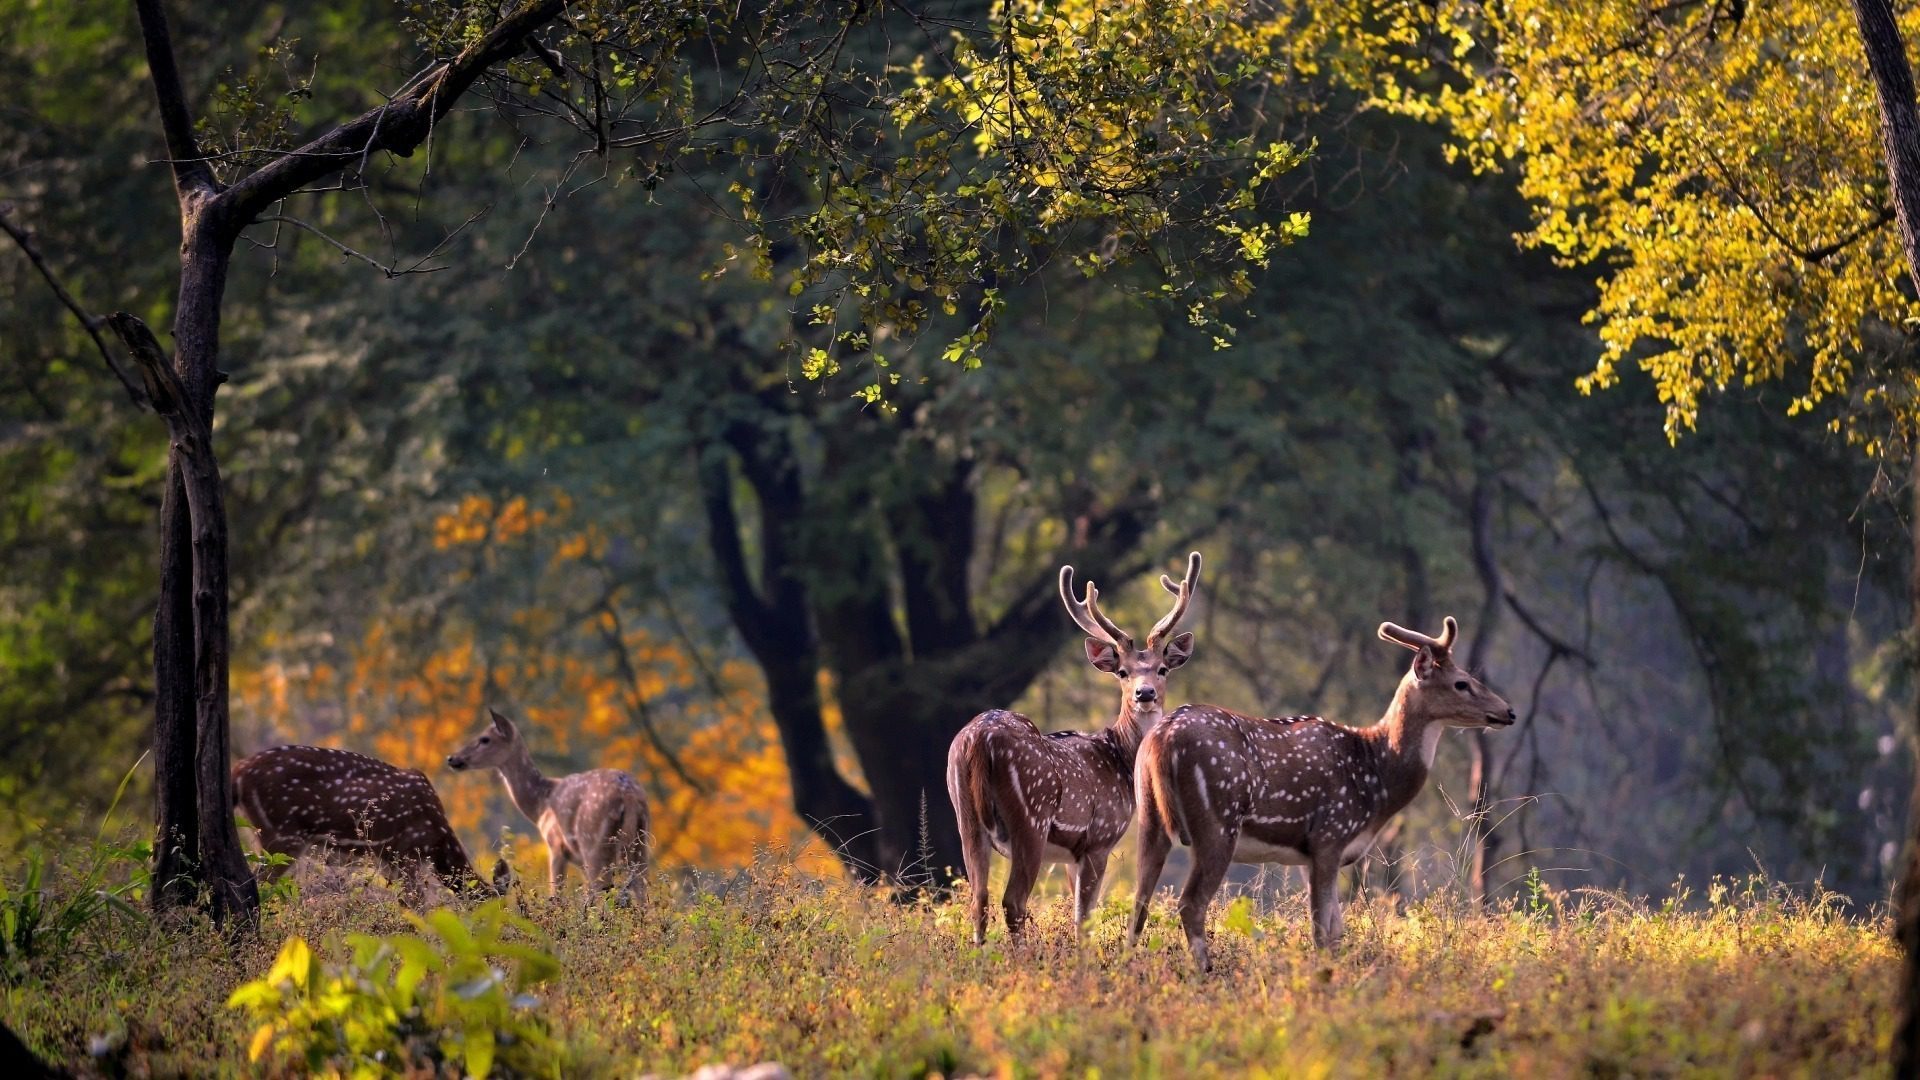 Kanha Travel Guide | Things To Do In Kanha National Park